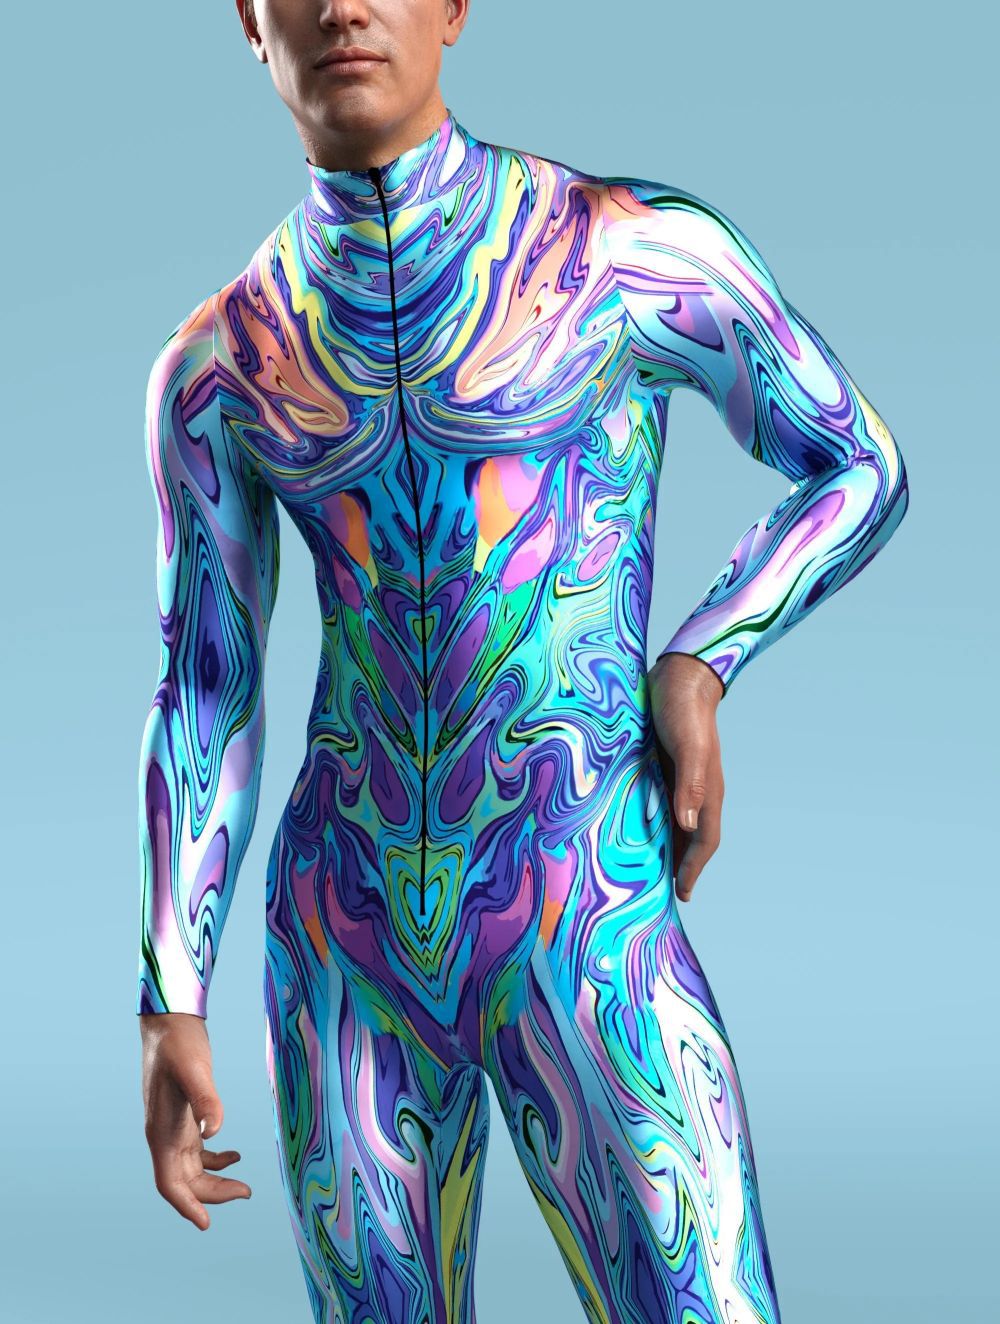 A person wearing a full-body, vibrant, multicolored 3D Digital Printed Cosplay One-piece Costume by Maramalive™ with a psychedelic pattern stands against a light blue background, embodying European and American style reminiscent of game animation role playing.